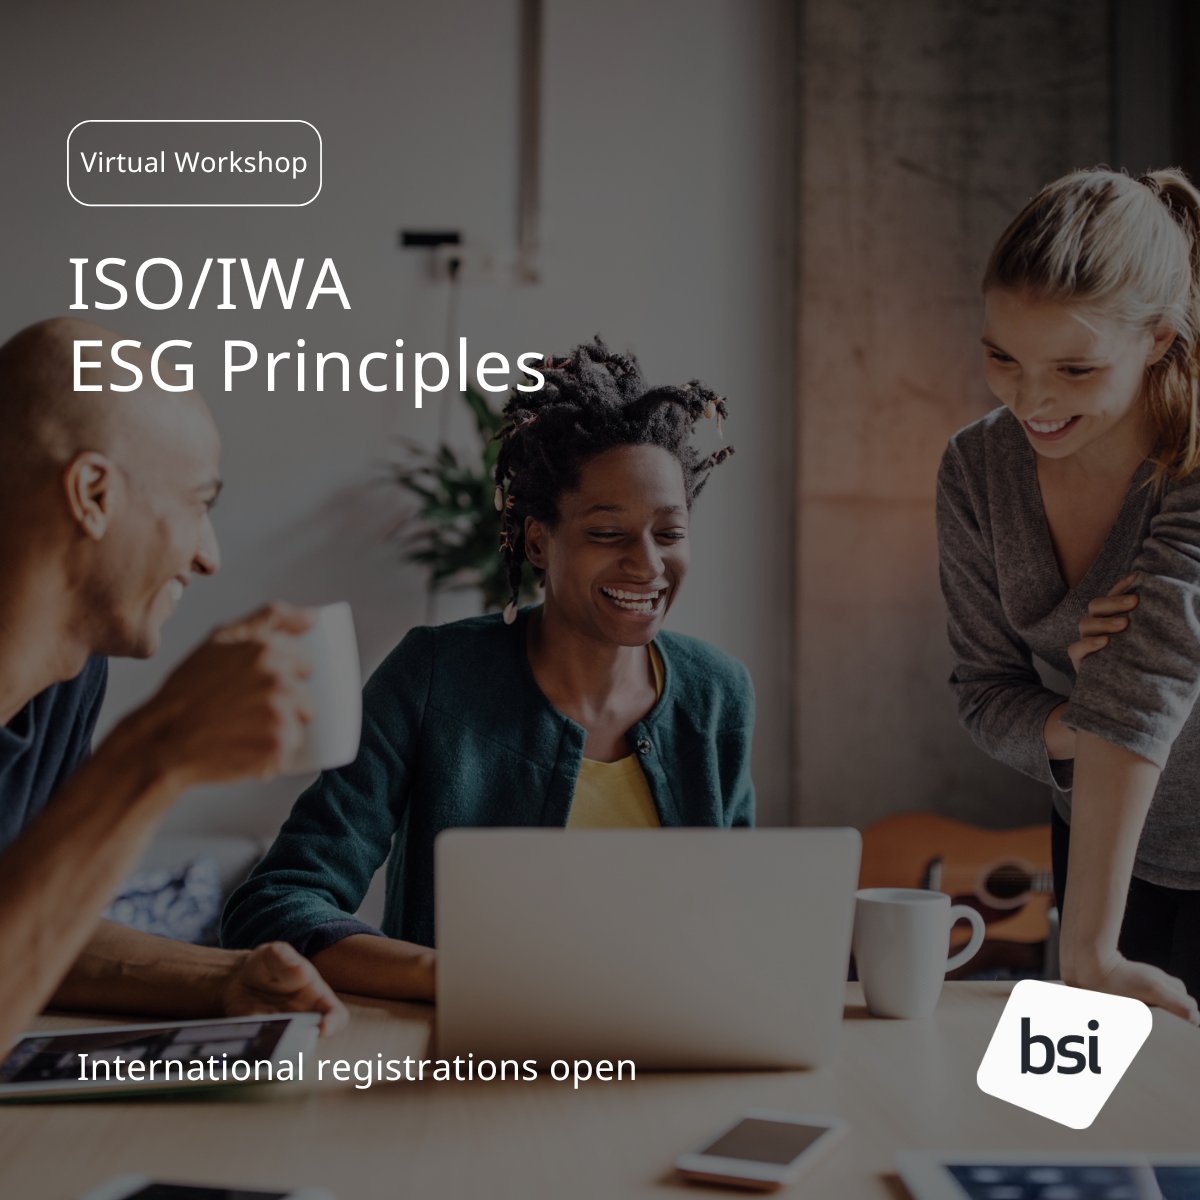 Calling all #ESG experts! Join us in developing a new #IWA framework for #ESGPrinciples. Register today and join the virtual workshops with @isostandards and BSI: bit.ly/3IV7mRu #Sustainability #BSIStandards #ESG